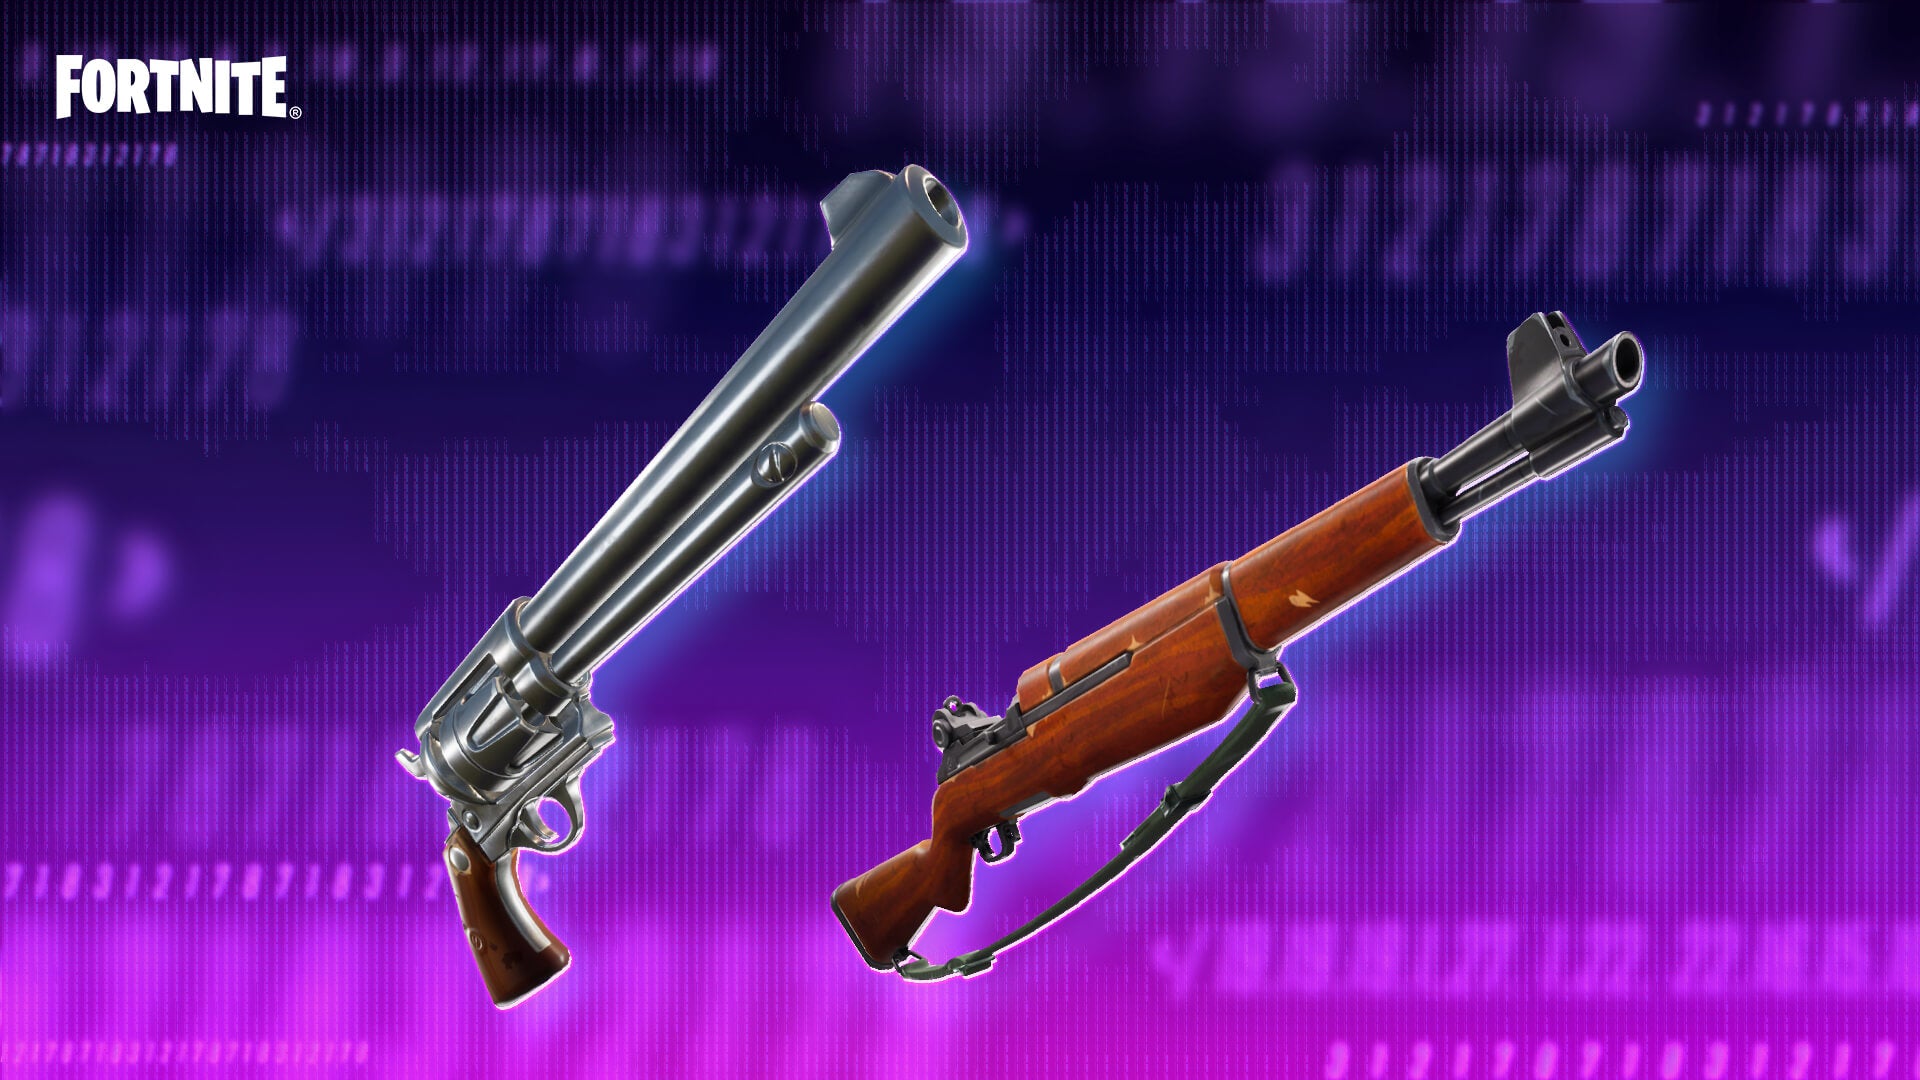 Are "Old School" weapons worth your time?